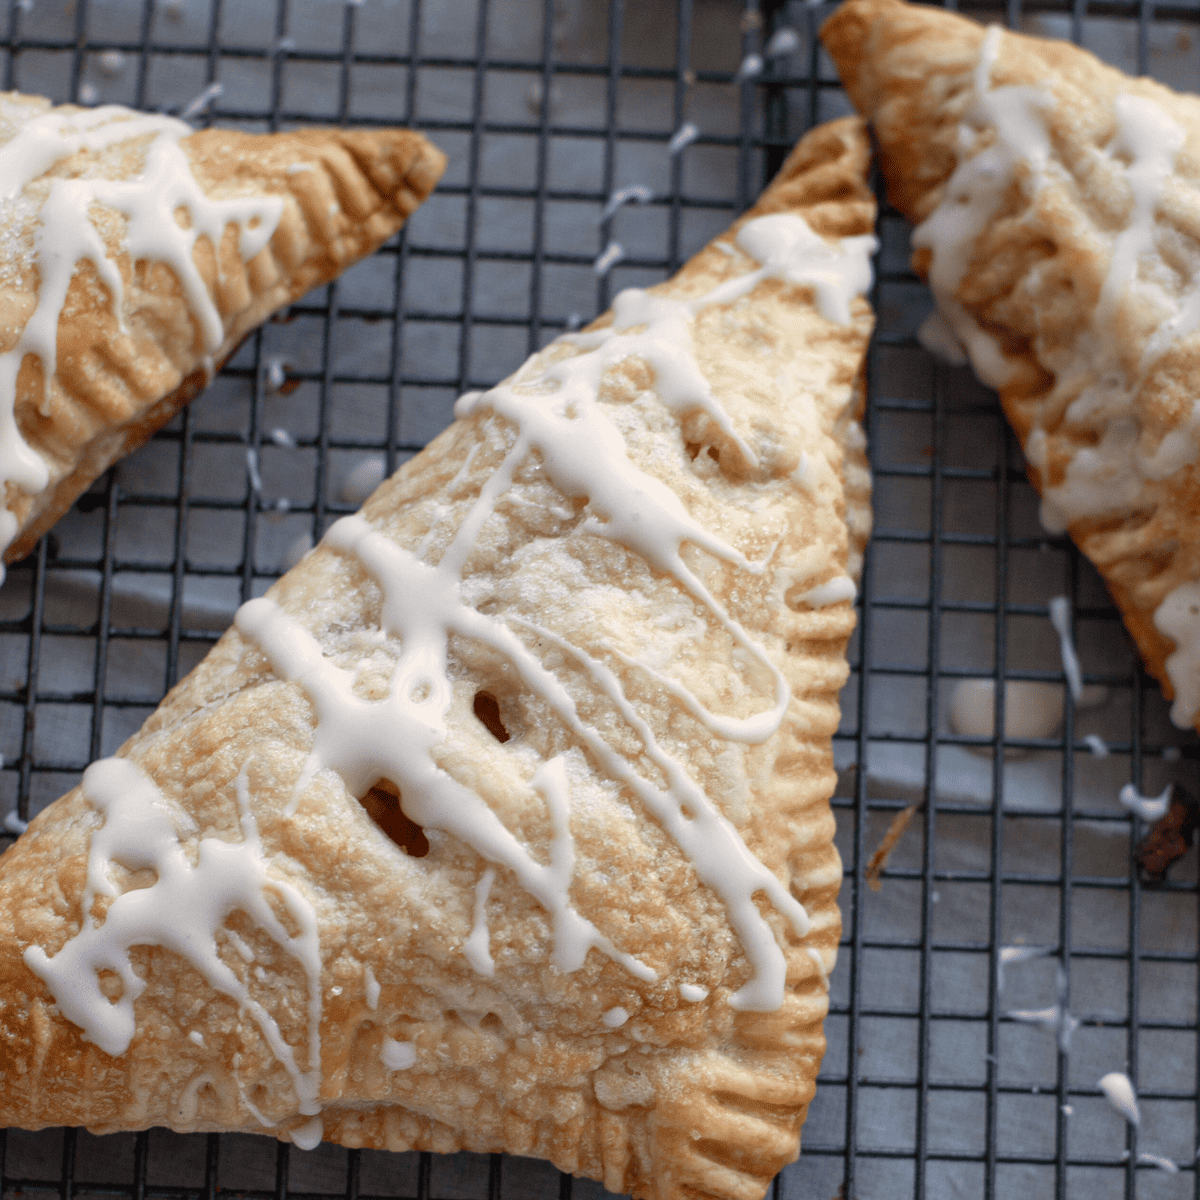 A tray of apple turnovers.